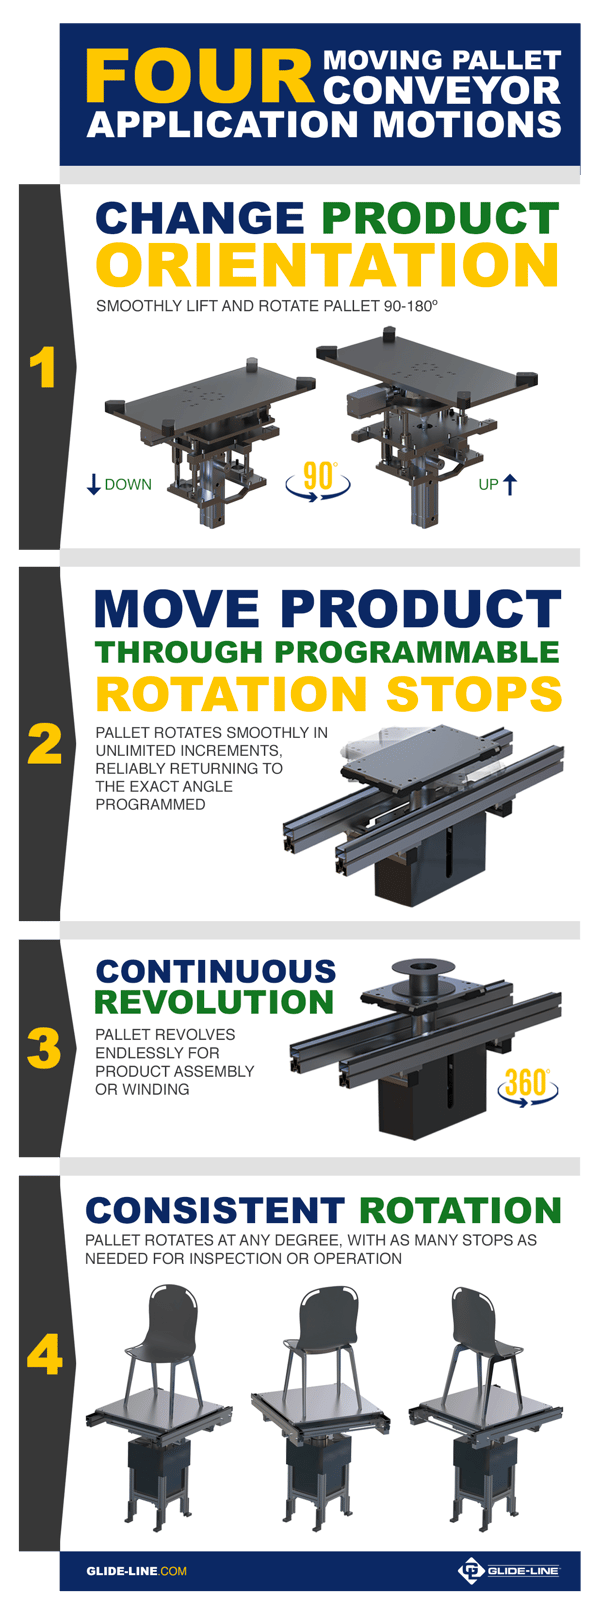 Infographic- 4 Moving Pallet Conveyor Application Motions v2 (3)